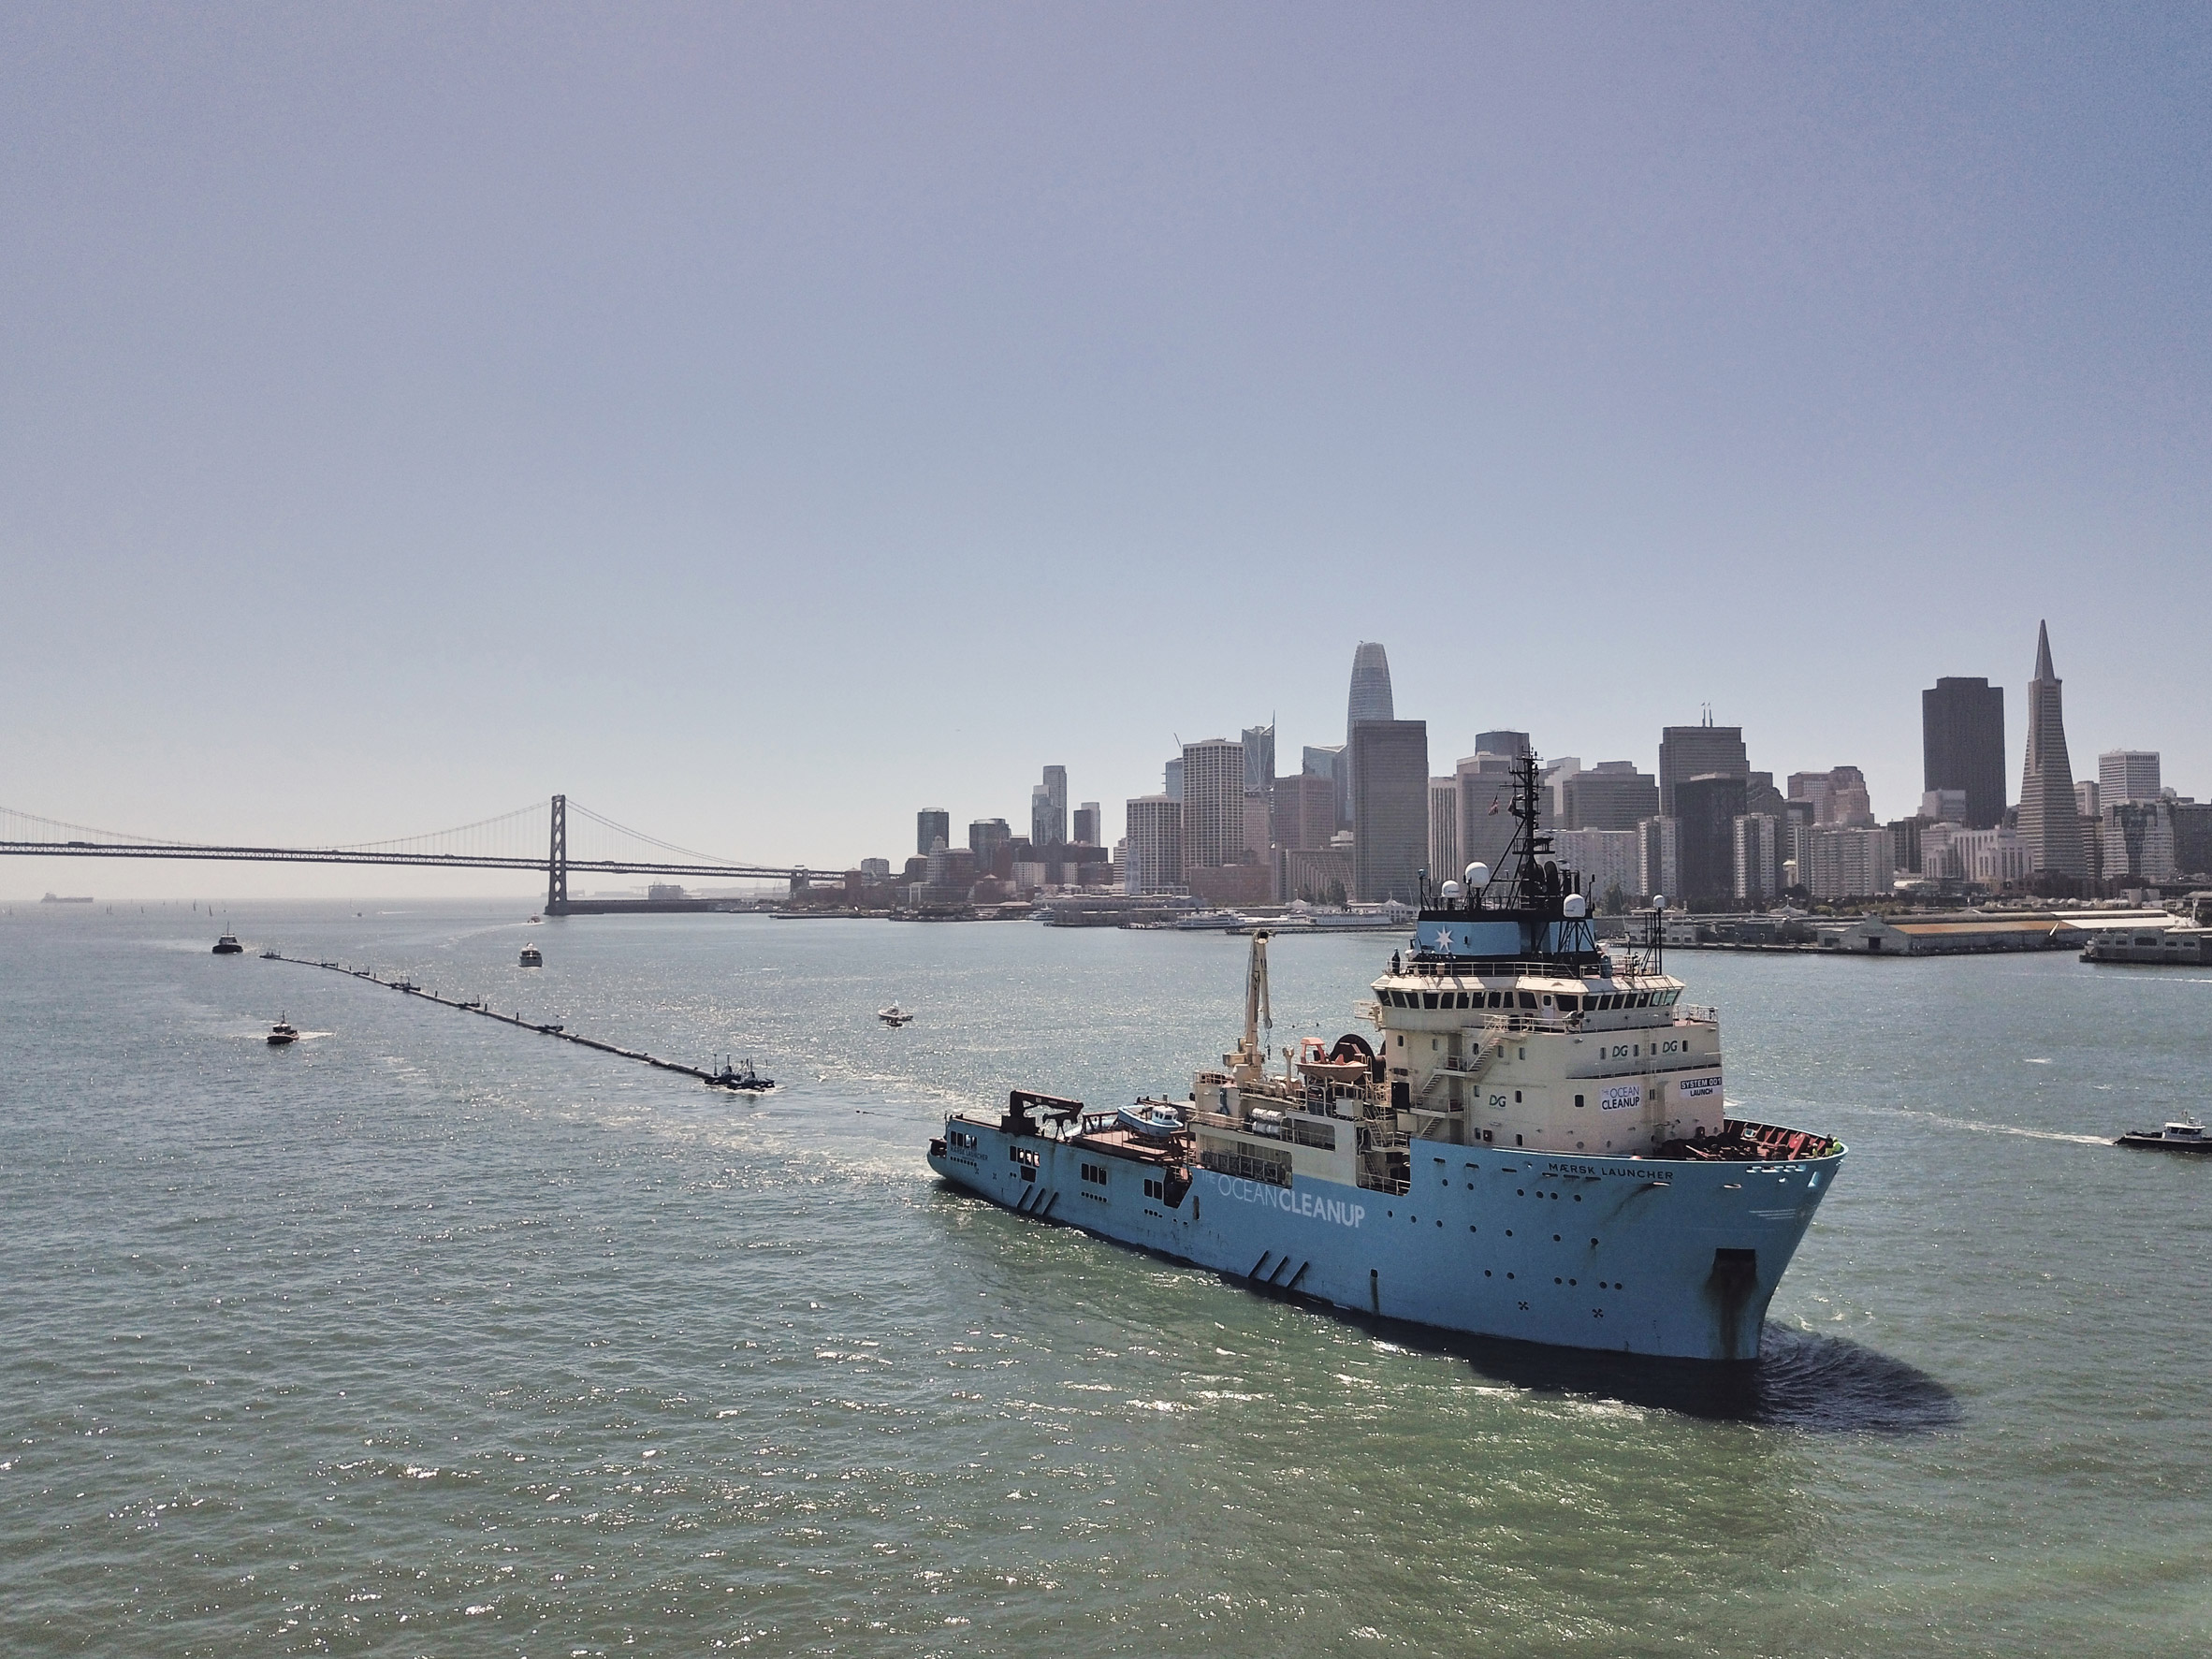 The Ocean Cleanup dispatches "giant Pac-Man" to remove plastic from the Pacific